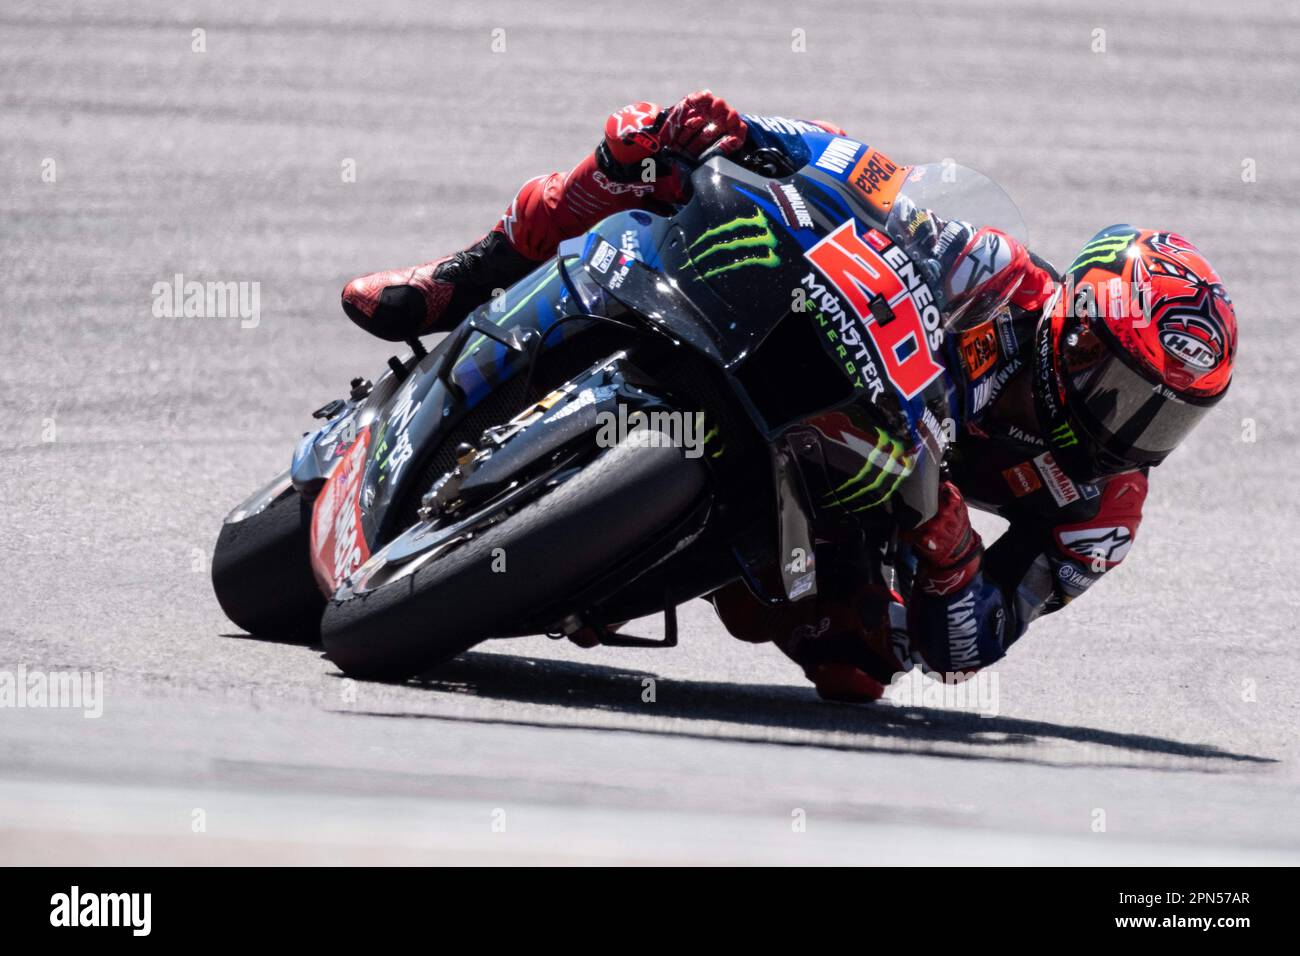 The Americas. 16th Apr, 2023. Fabio Quartararo (20) with Monster Energy Yamaha MotoGP in action at the Red Bull Grand Prix of the Americas, Circuit of The Americas